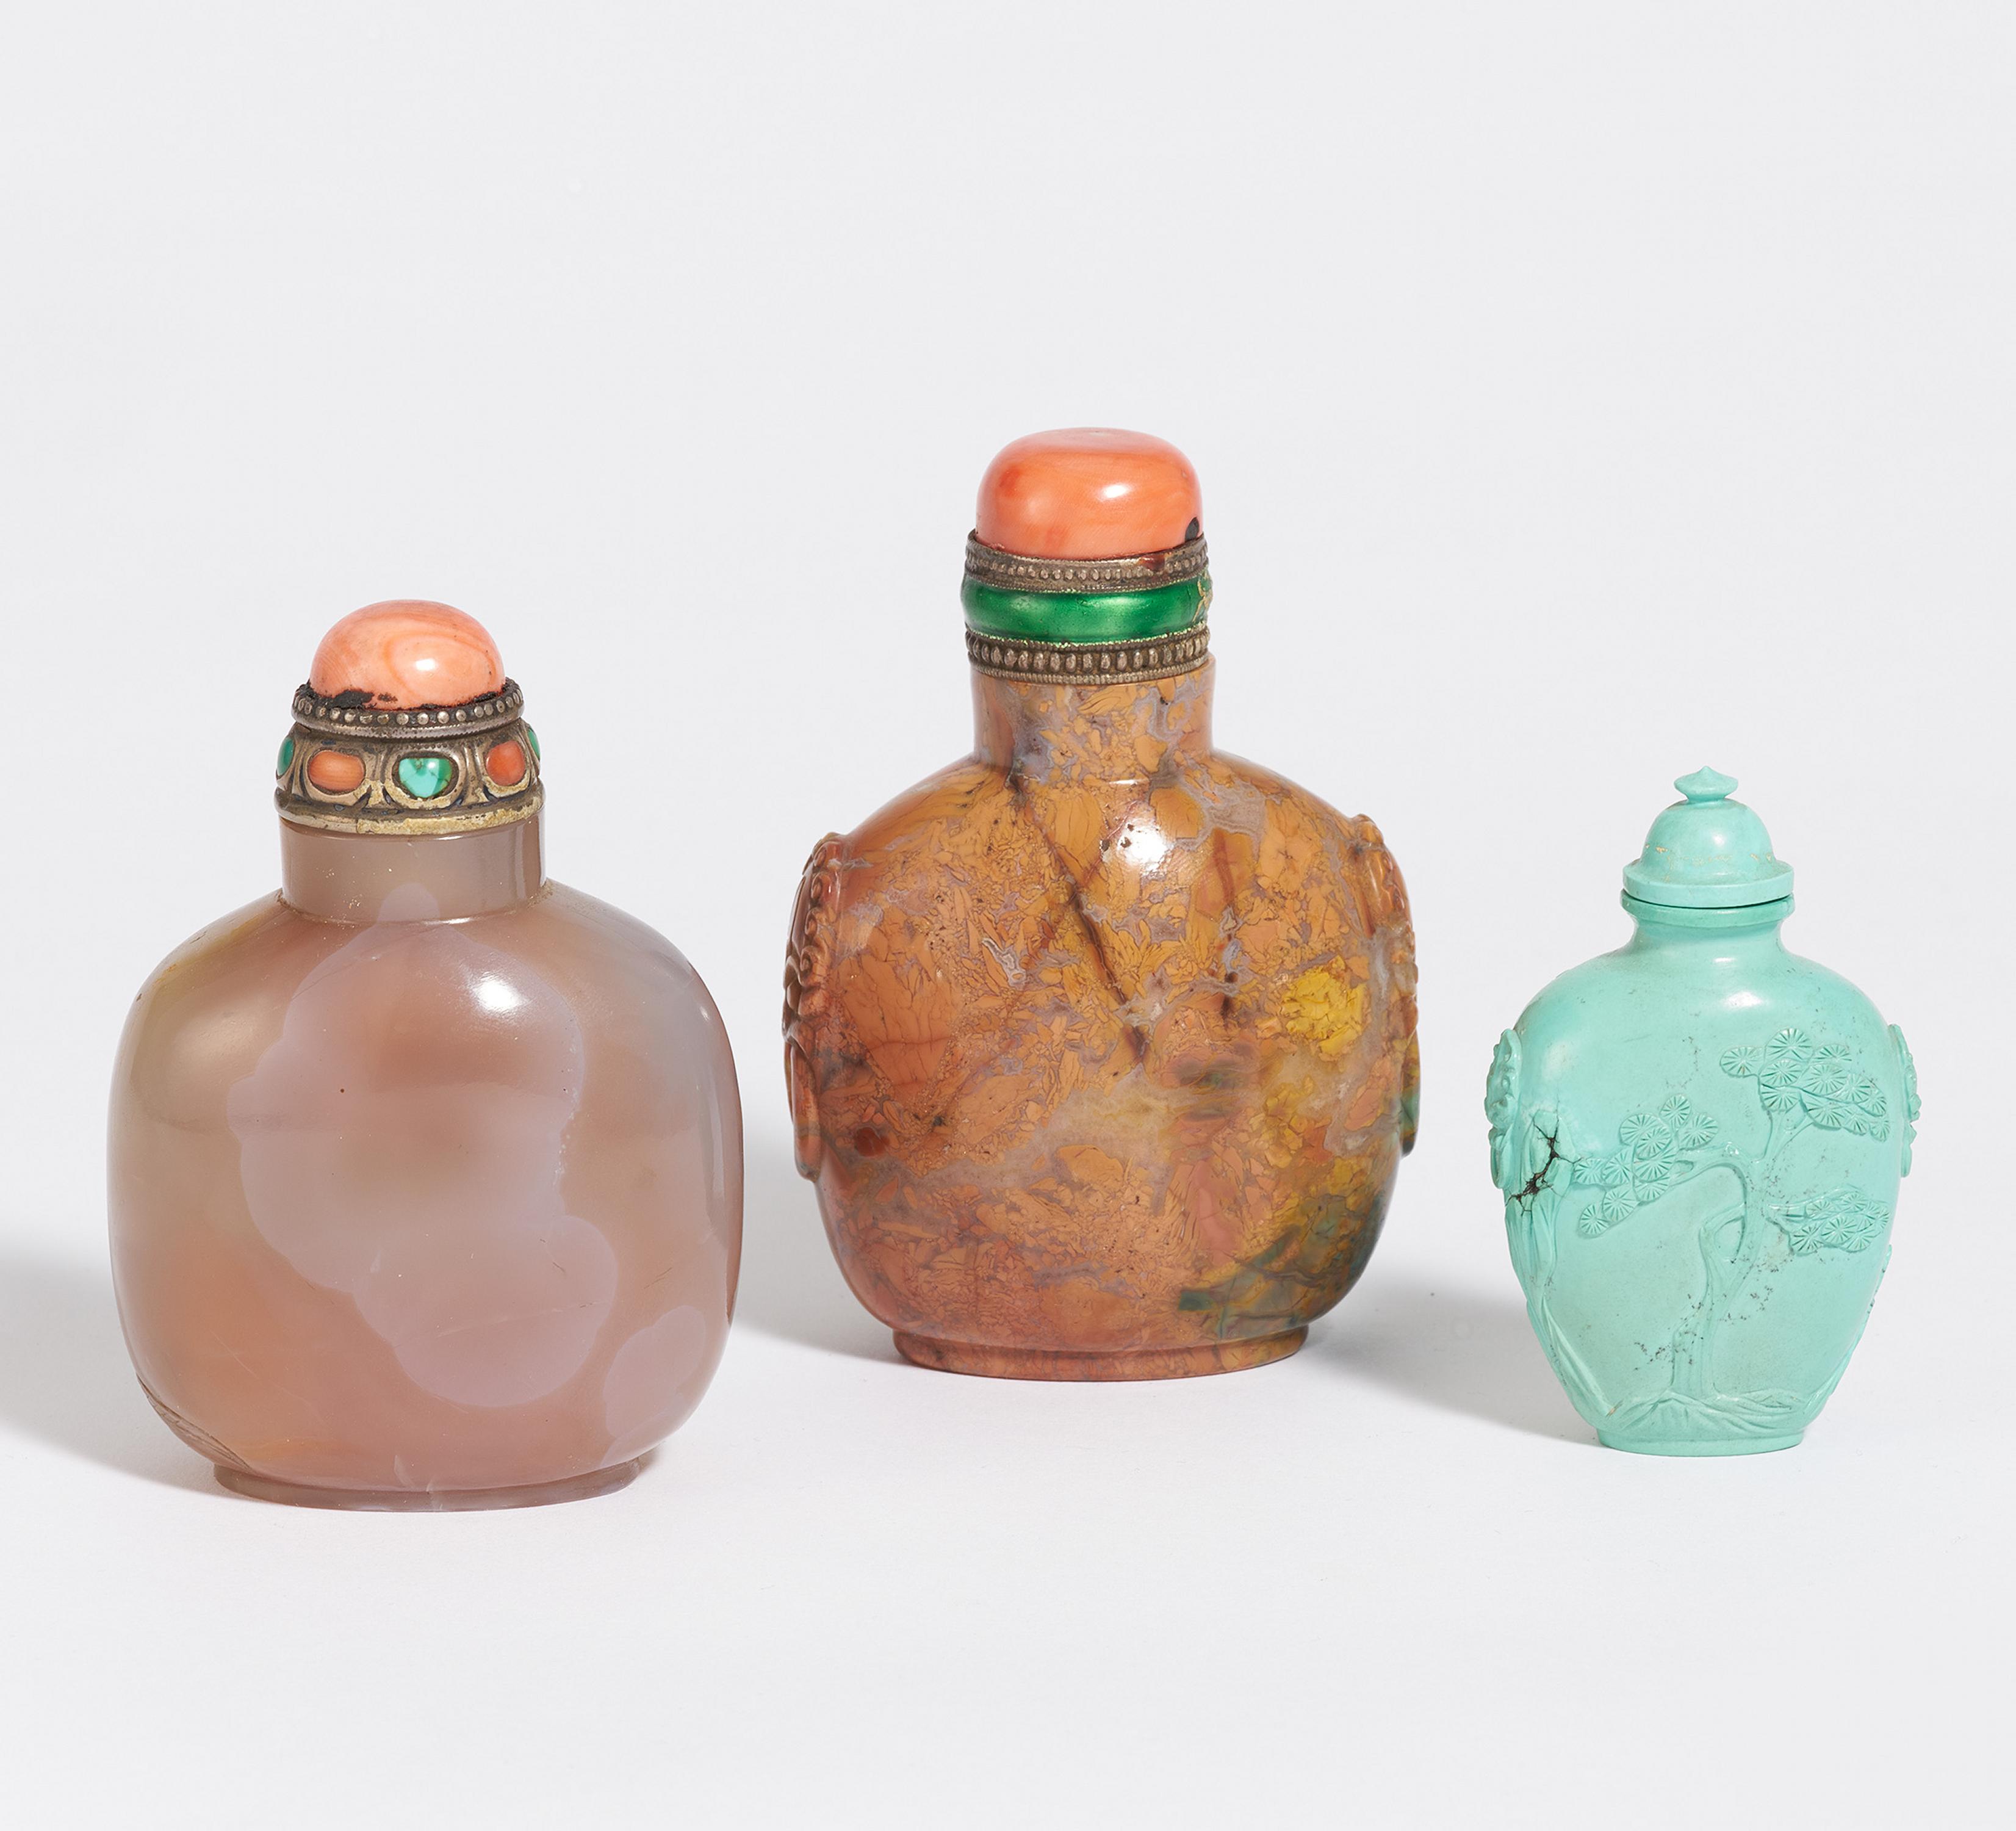 THREE SNUFFBOTTLE FROM STONE. Origin: China. Dynasty: Qing dynasty (1644-1912). Description: a) - Image 2 of 2